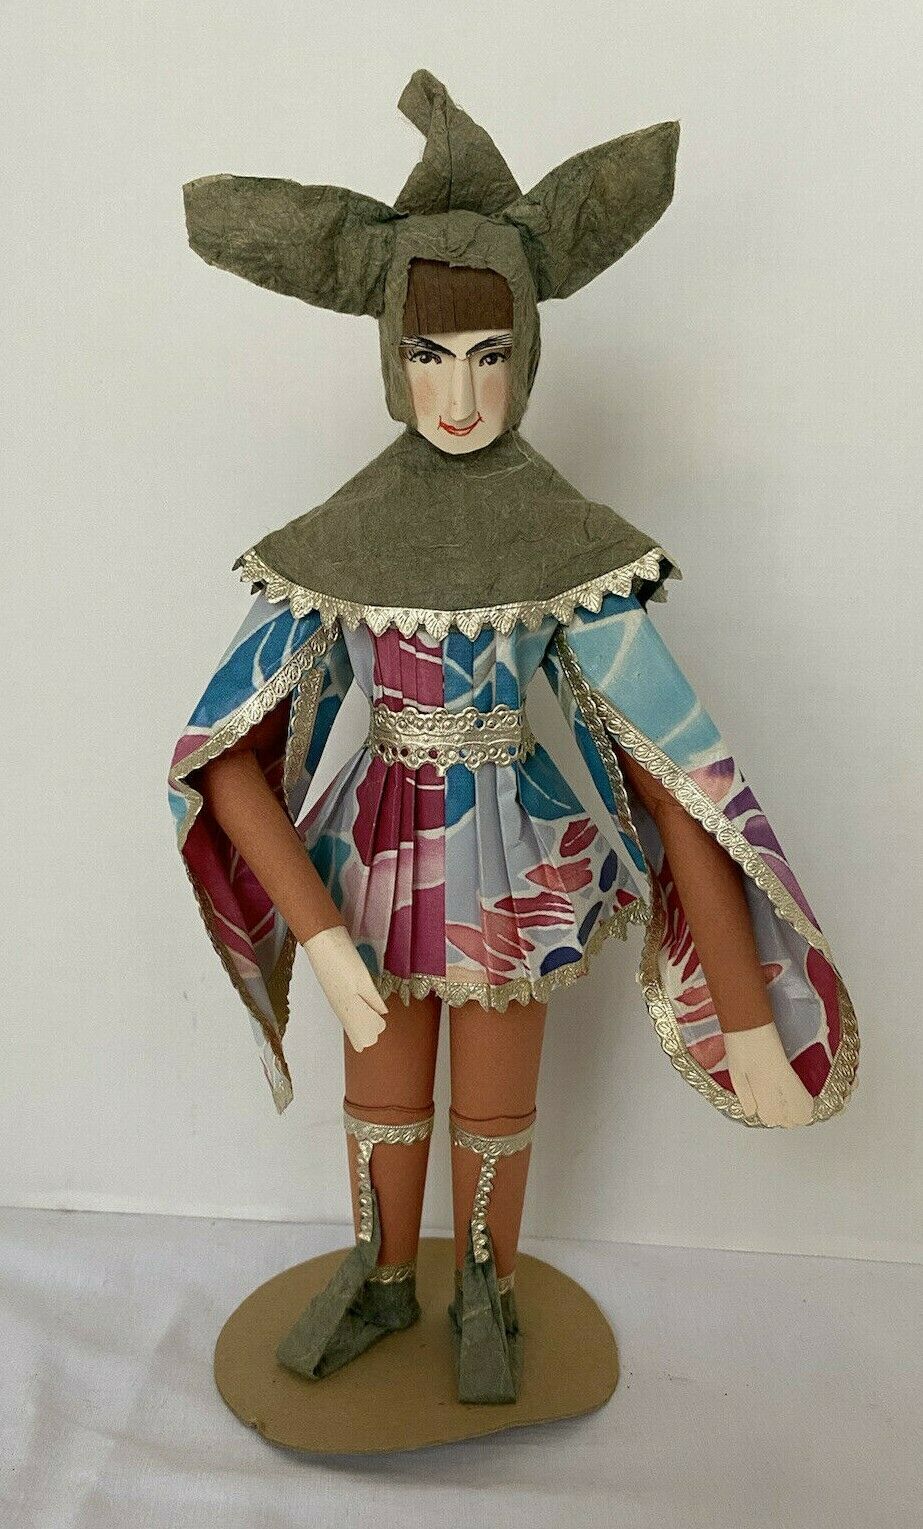 Niada Artist Doll By Mirren Barrie, “the Jester” 1997, Made Of Paper!